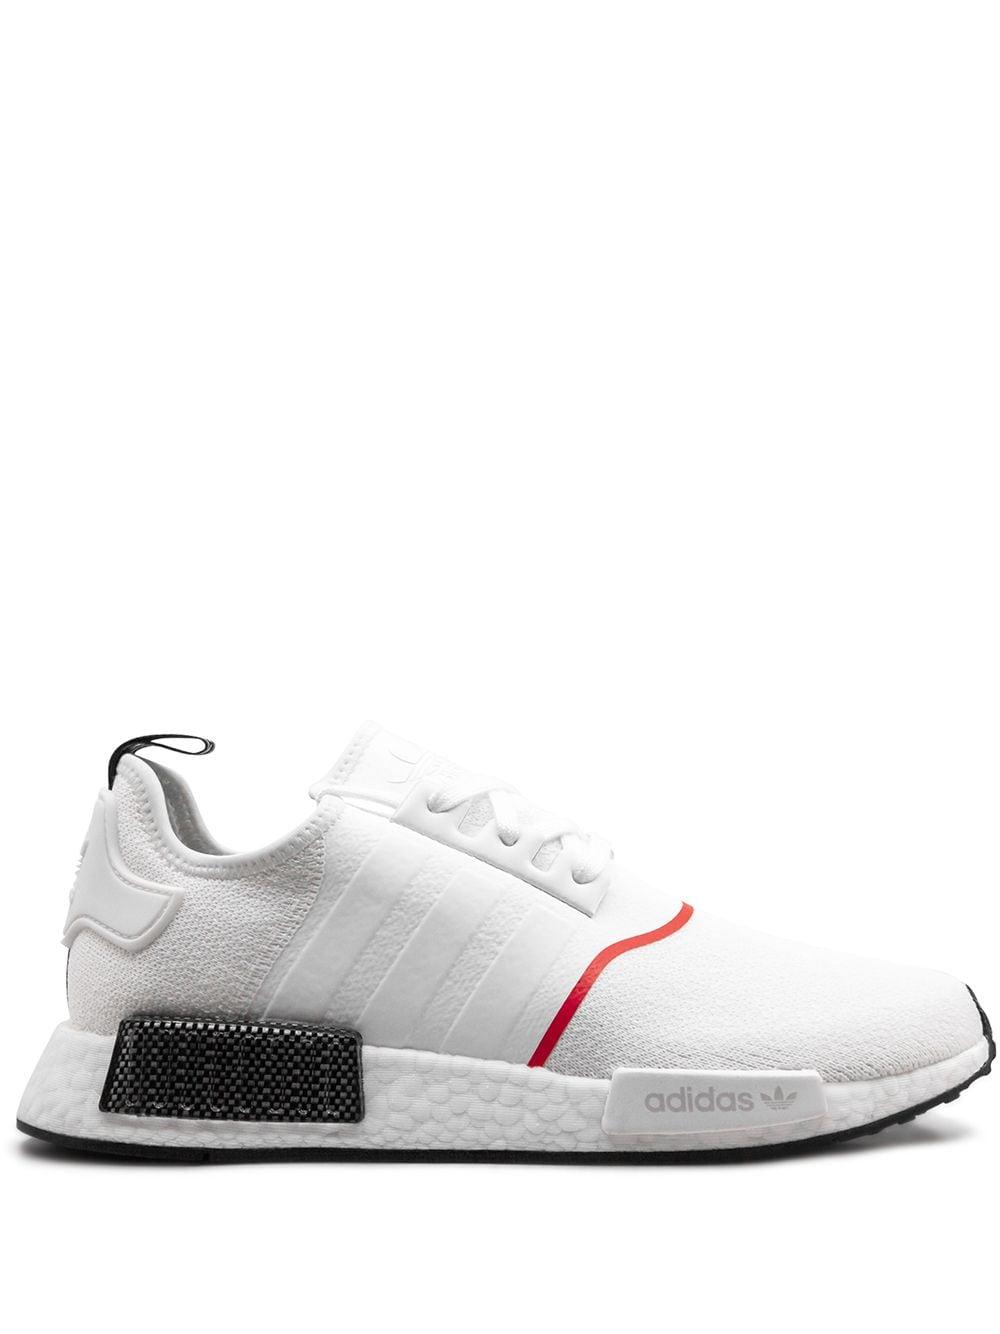 Prestigefyldte Ombord legering adidas Synthetic Nmd R1 Sneakers in White for Men - Lyst